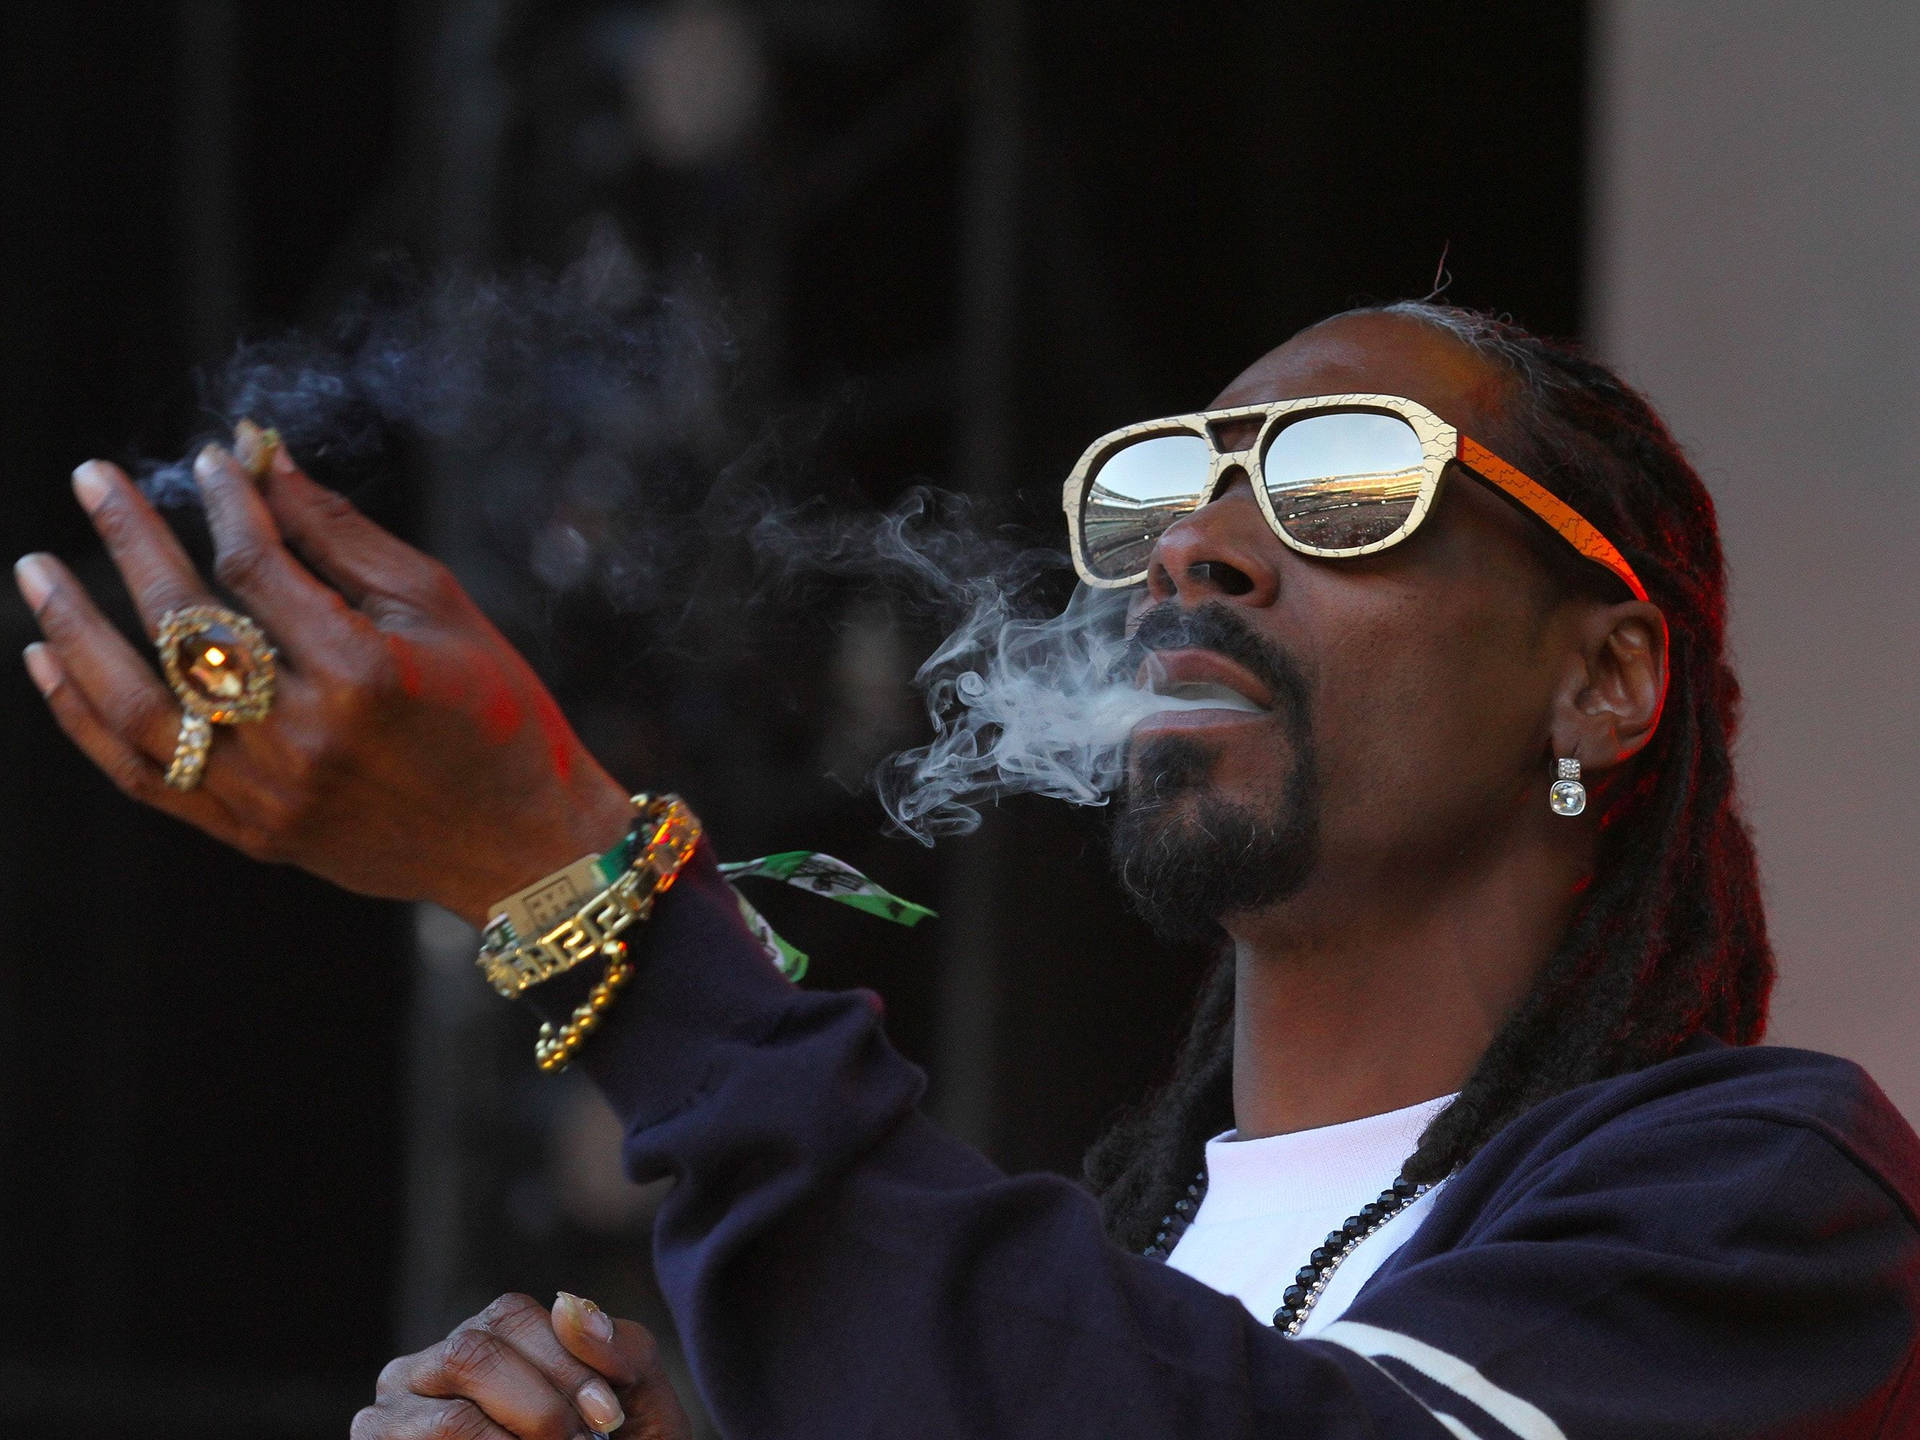 Blinged-out Snoop Dog Smoking Background